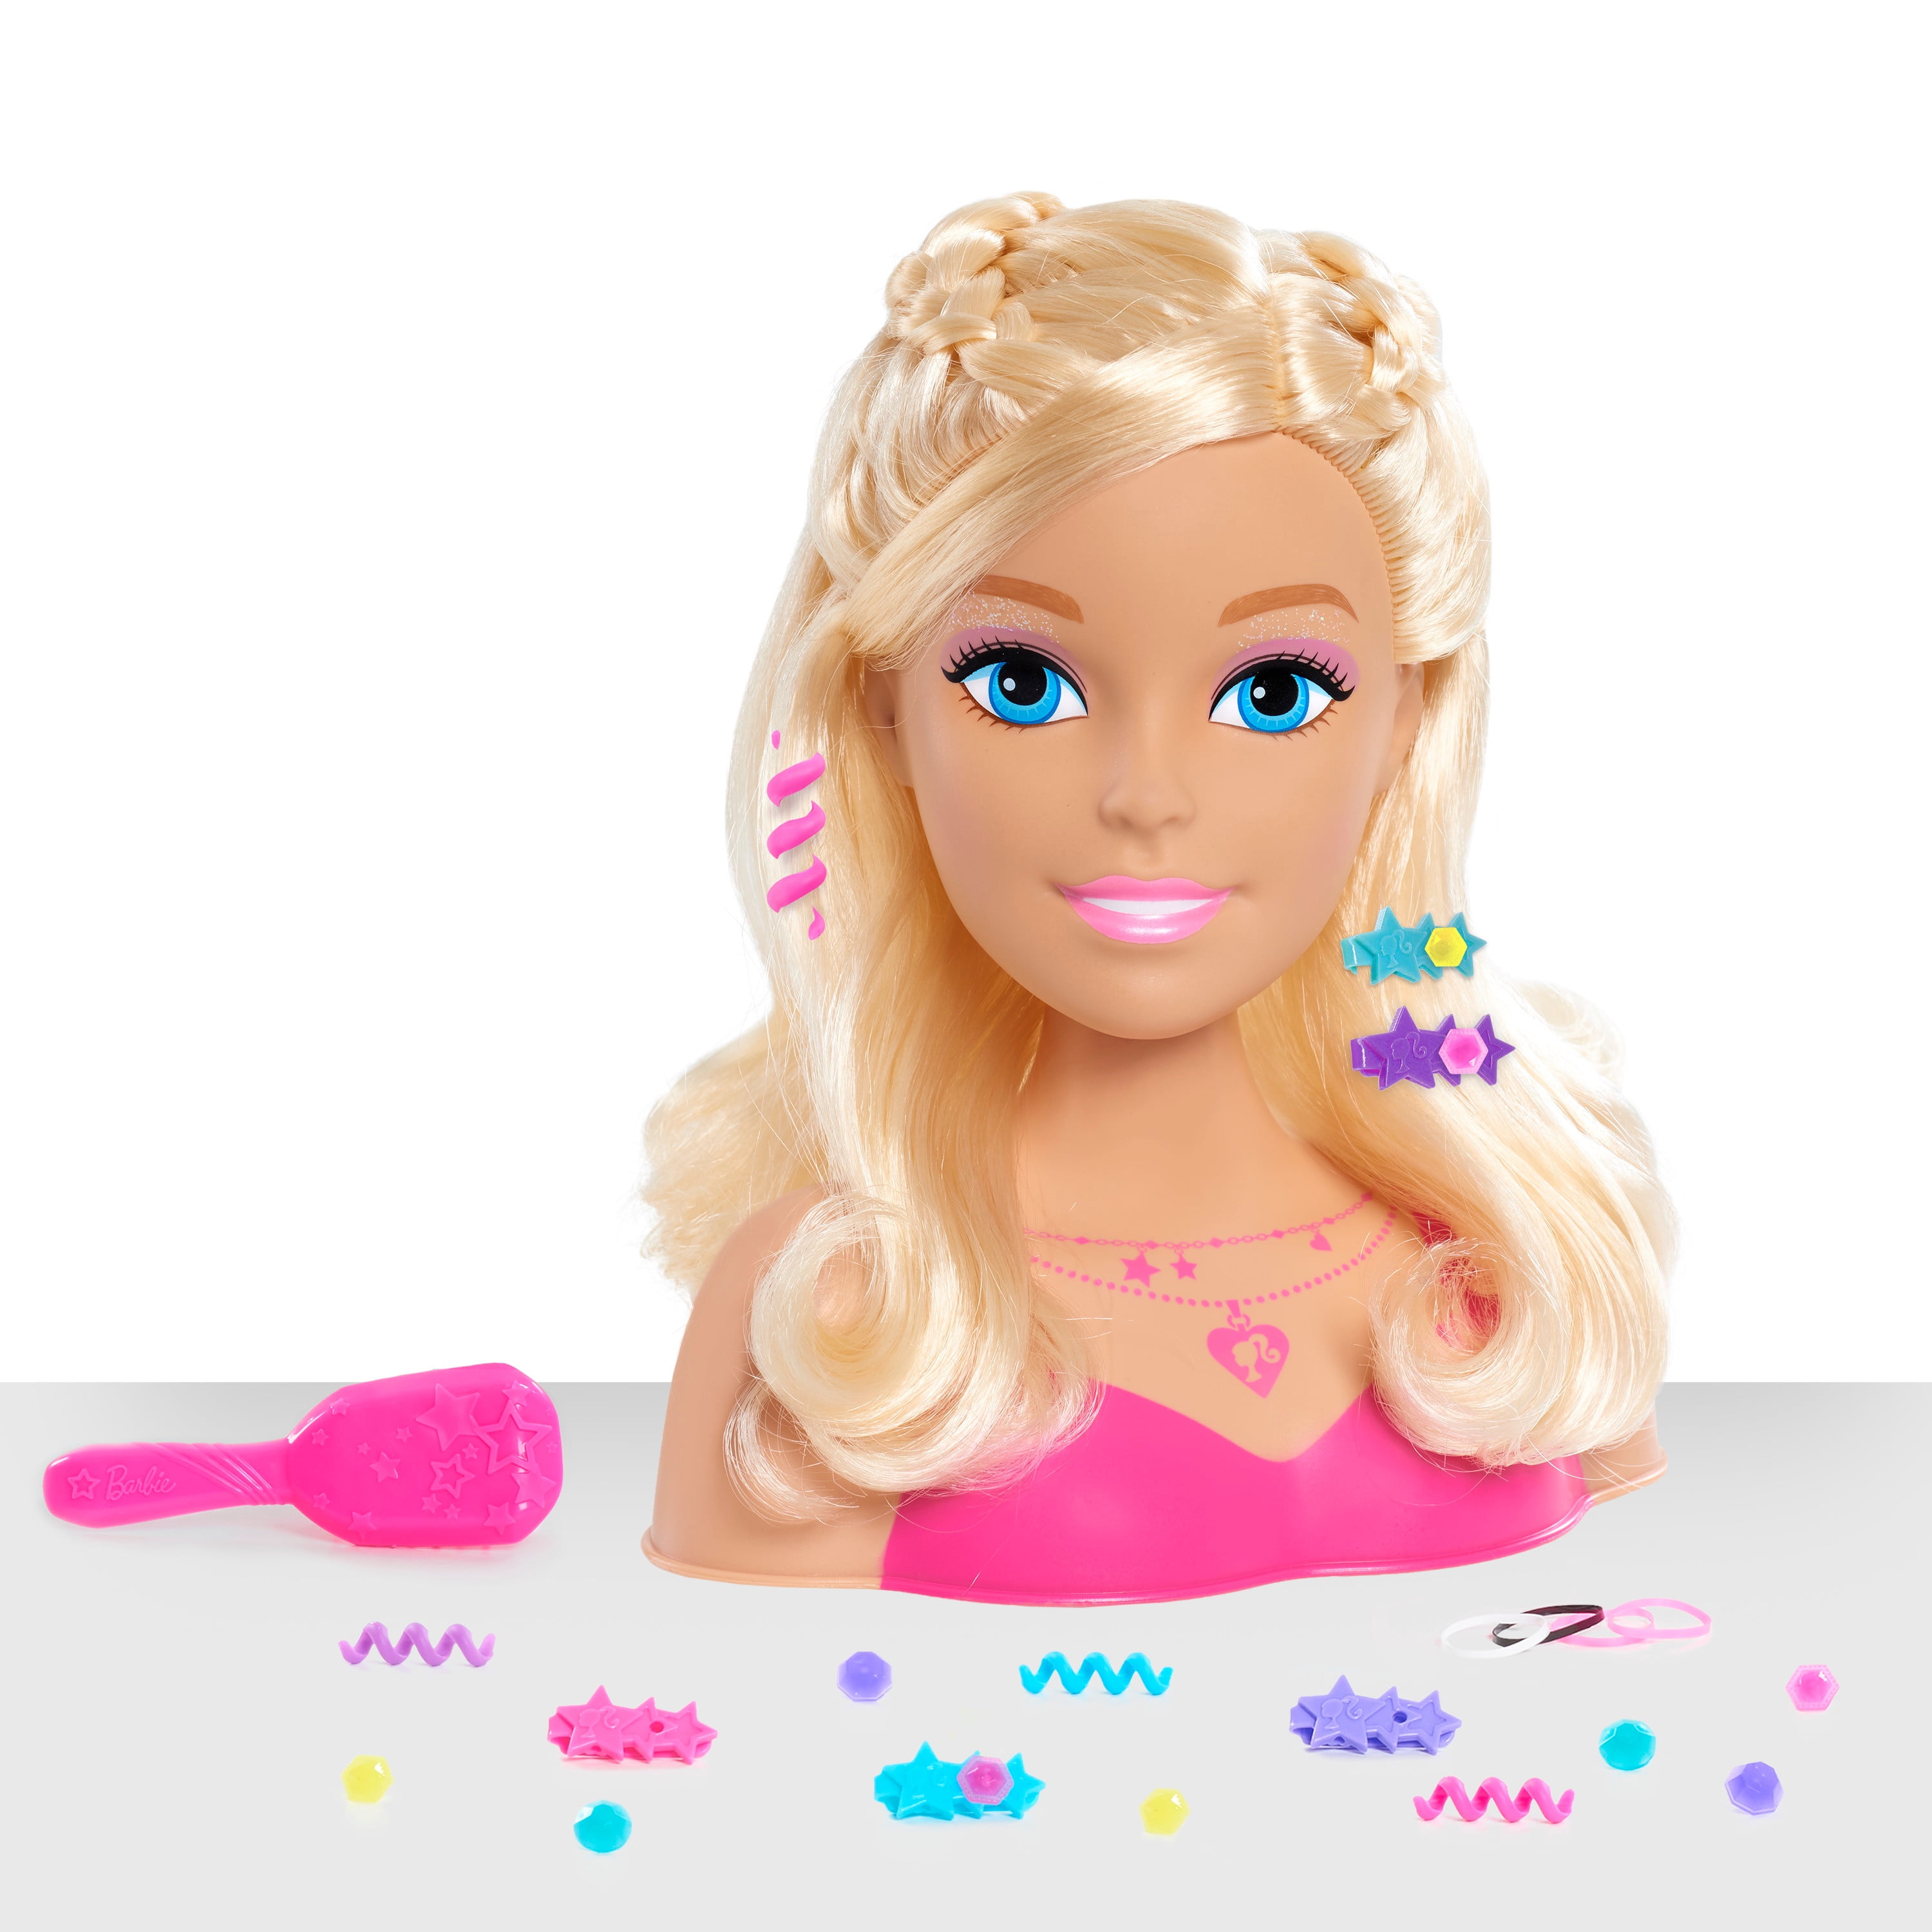 Barbie Fashionistas 8-Inch Styling Head, Blonde, 20 Pieces Include Styling  Accessories, Hair Styling for Kids, Kids Toys for Ages 3 Up, Gifts and  Presents 